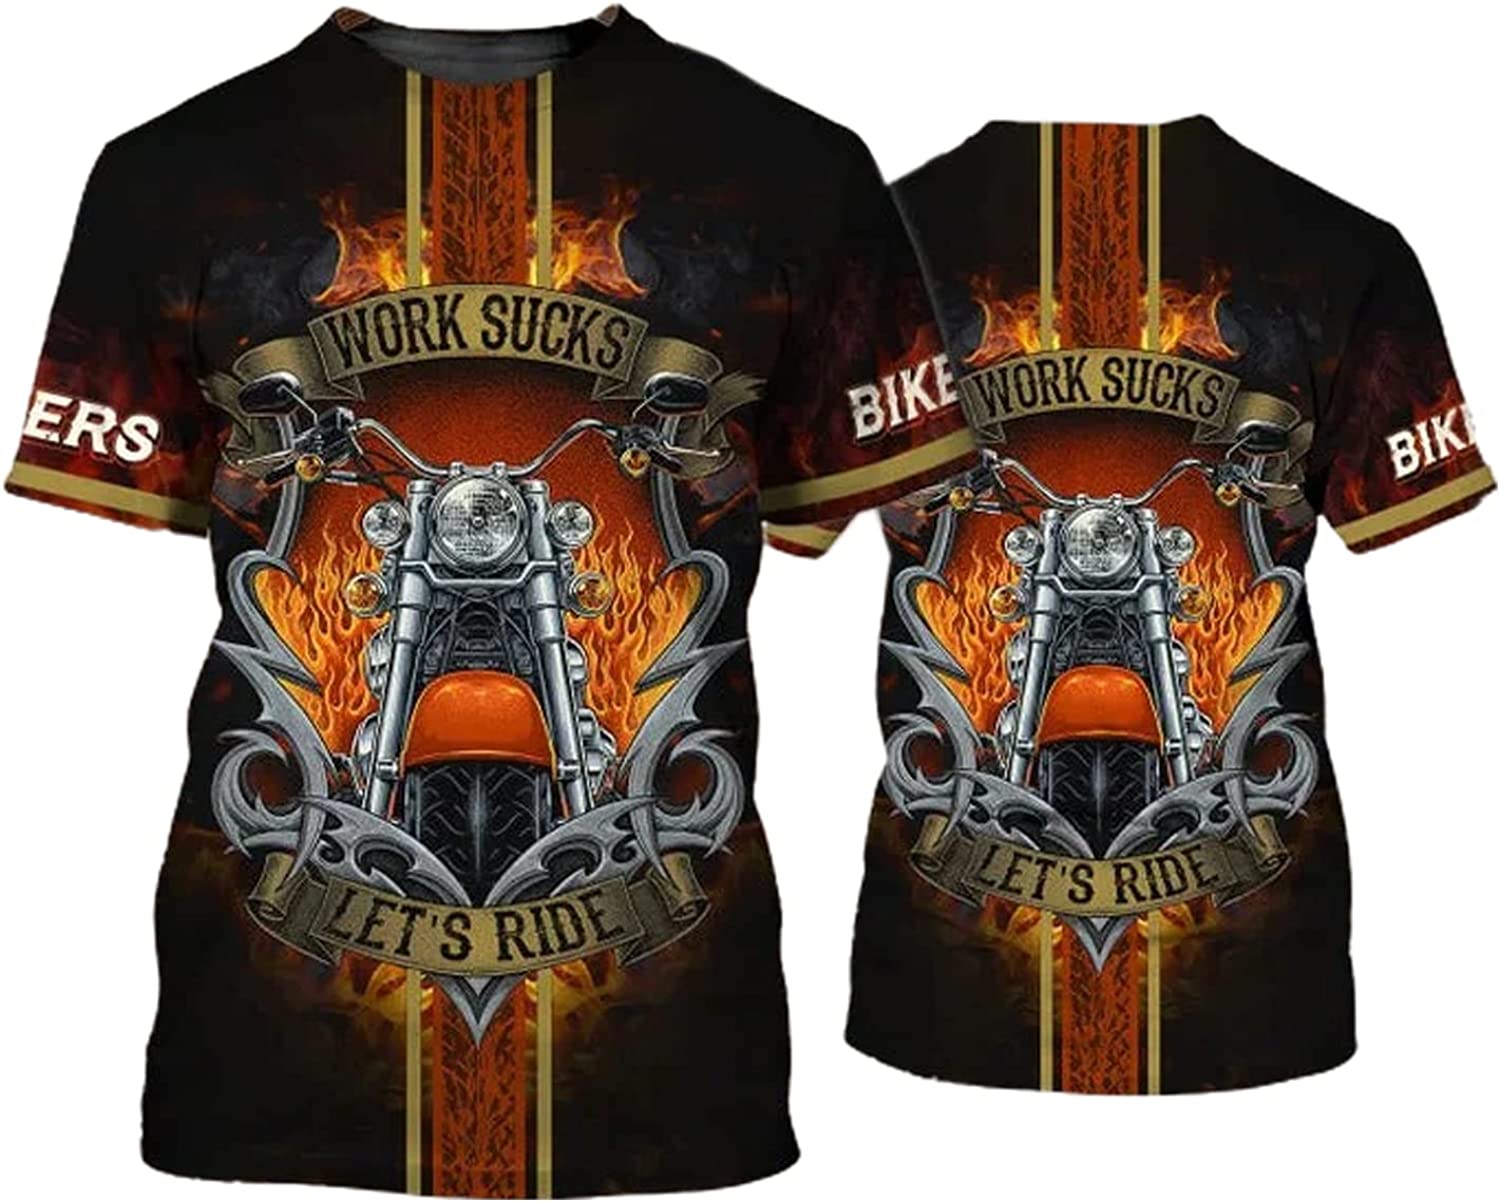 3D Printed Biker Shirt with Personalized Design: Perfect Gift for Biker Enthusiasts and Baseball Players – JOT1586